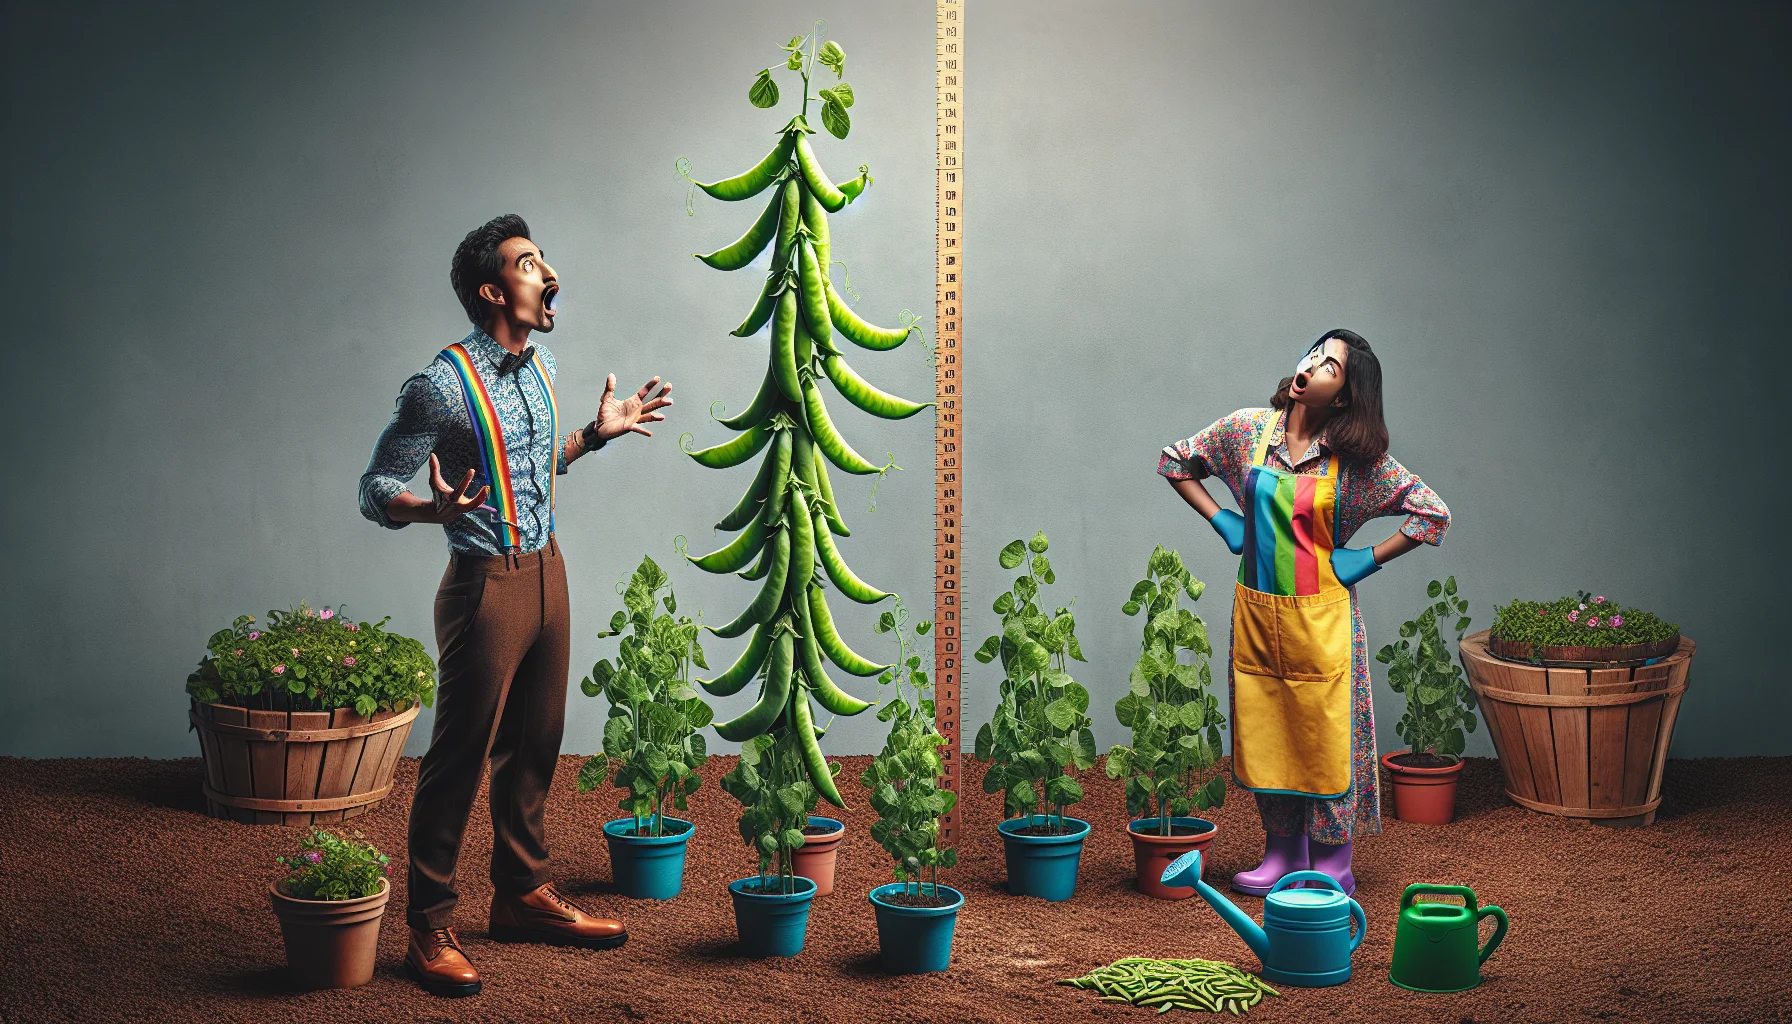 Produce an image that captures an intriguing and humorous scenario related to gardening. This image should focus on sugar snap peas and their surprising growth height. The setup should seem realistic and should spotlight a person standing awestruck next to the towering sugar snap peas vine, which has escalated more than a chart kept for measuring the height. Their expression should reflect the hysterical and unexpected growth of the peas. This person should be a South Asian female dressed in colorful gardening attire, with a watering can in one hand. The overall vibe should encourage people to find joy in the process of gardening.